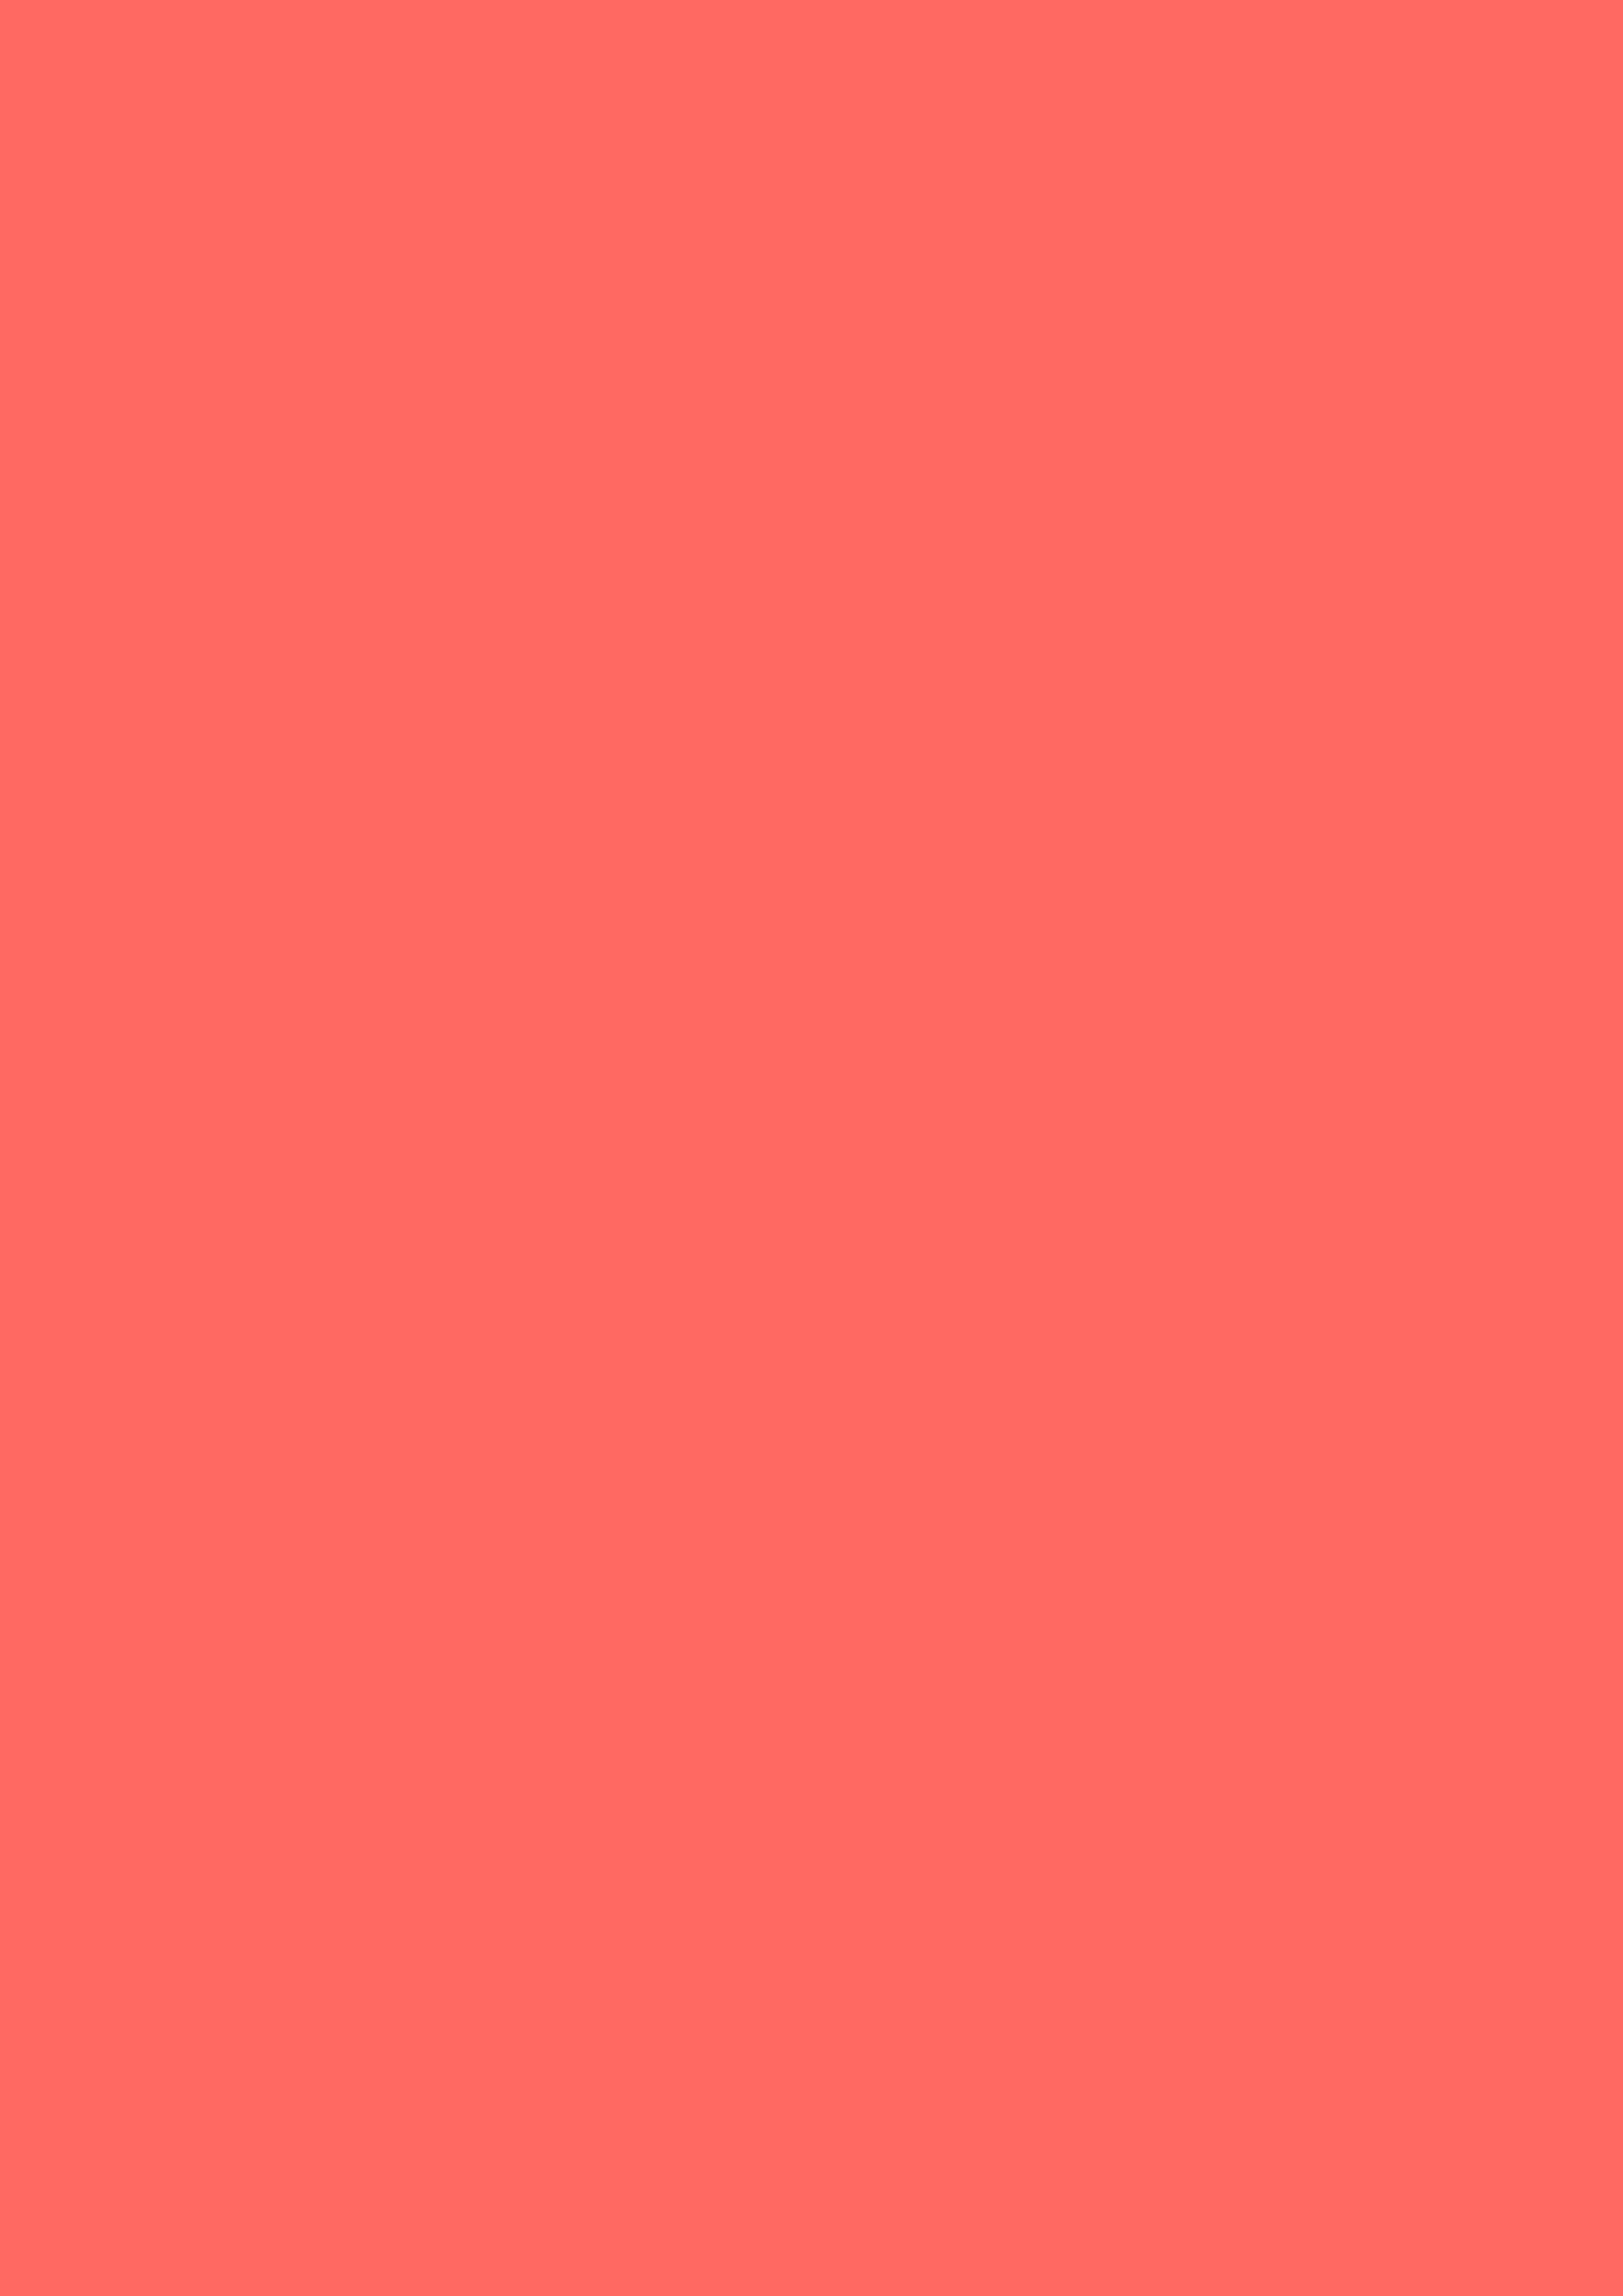 2480x3508 Pastel Red Solid Color Background